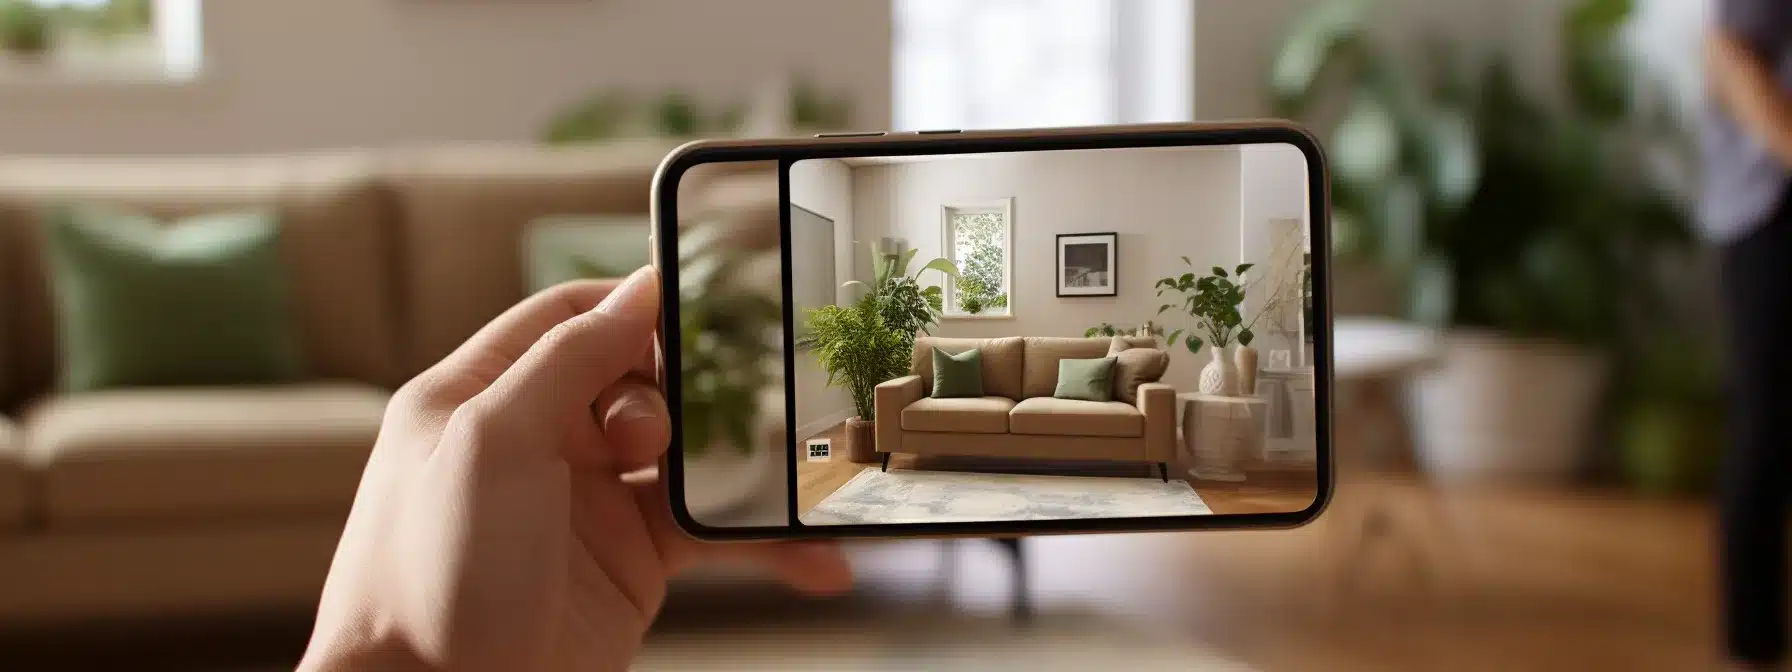 A Person Using A Smartphone To View And Interact With Virtual Objects That Appear In Their Living Room.